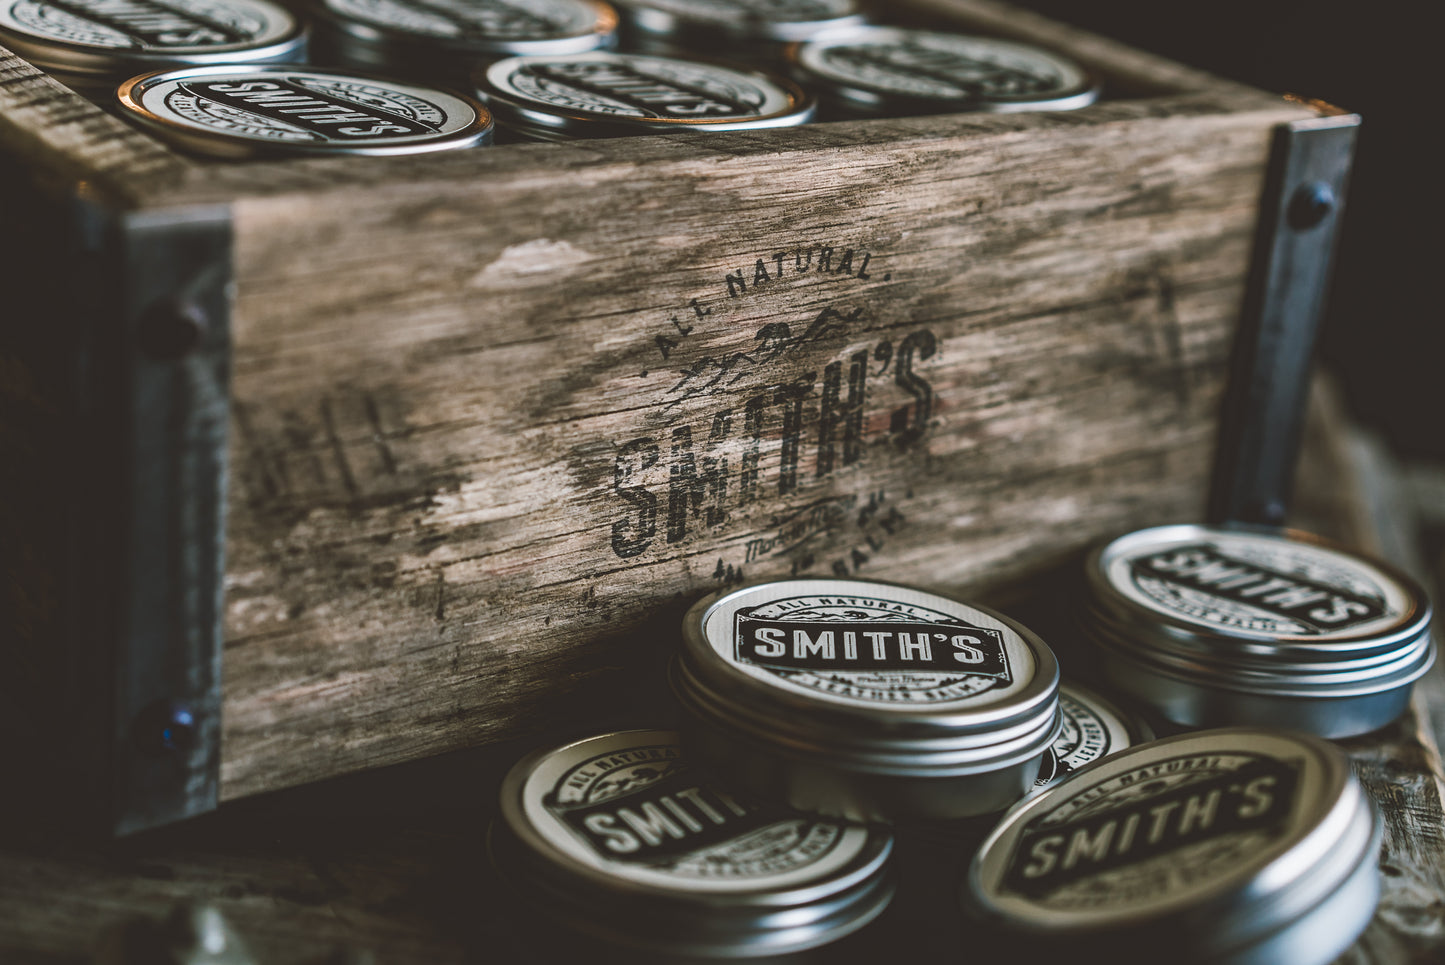 Smith's Natural Leather Balm